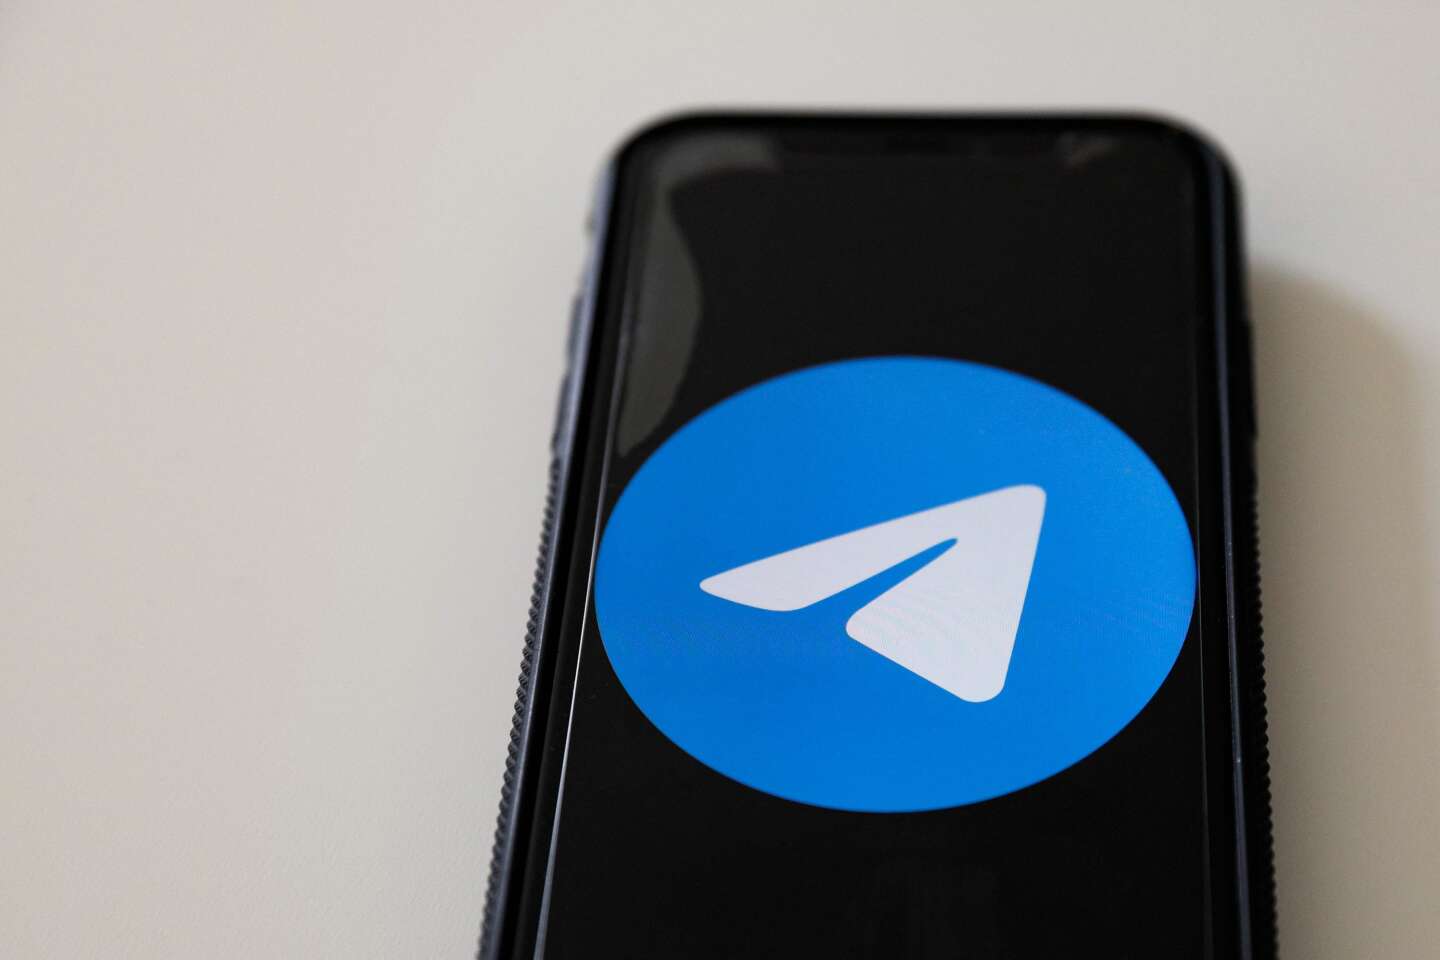 In Brazil, Telegram’s suspension was overturned by justice